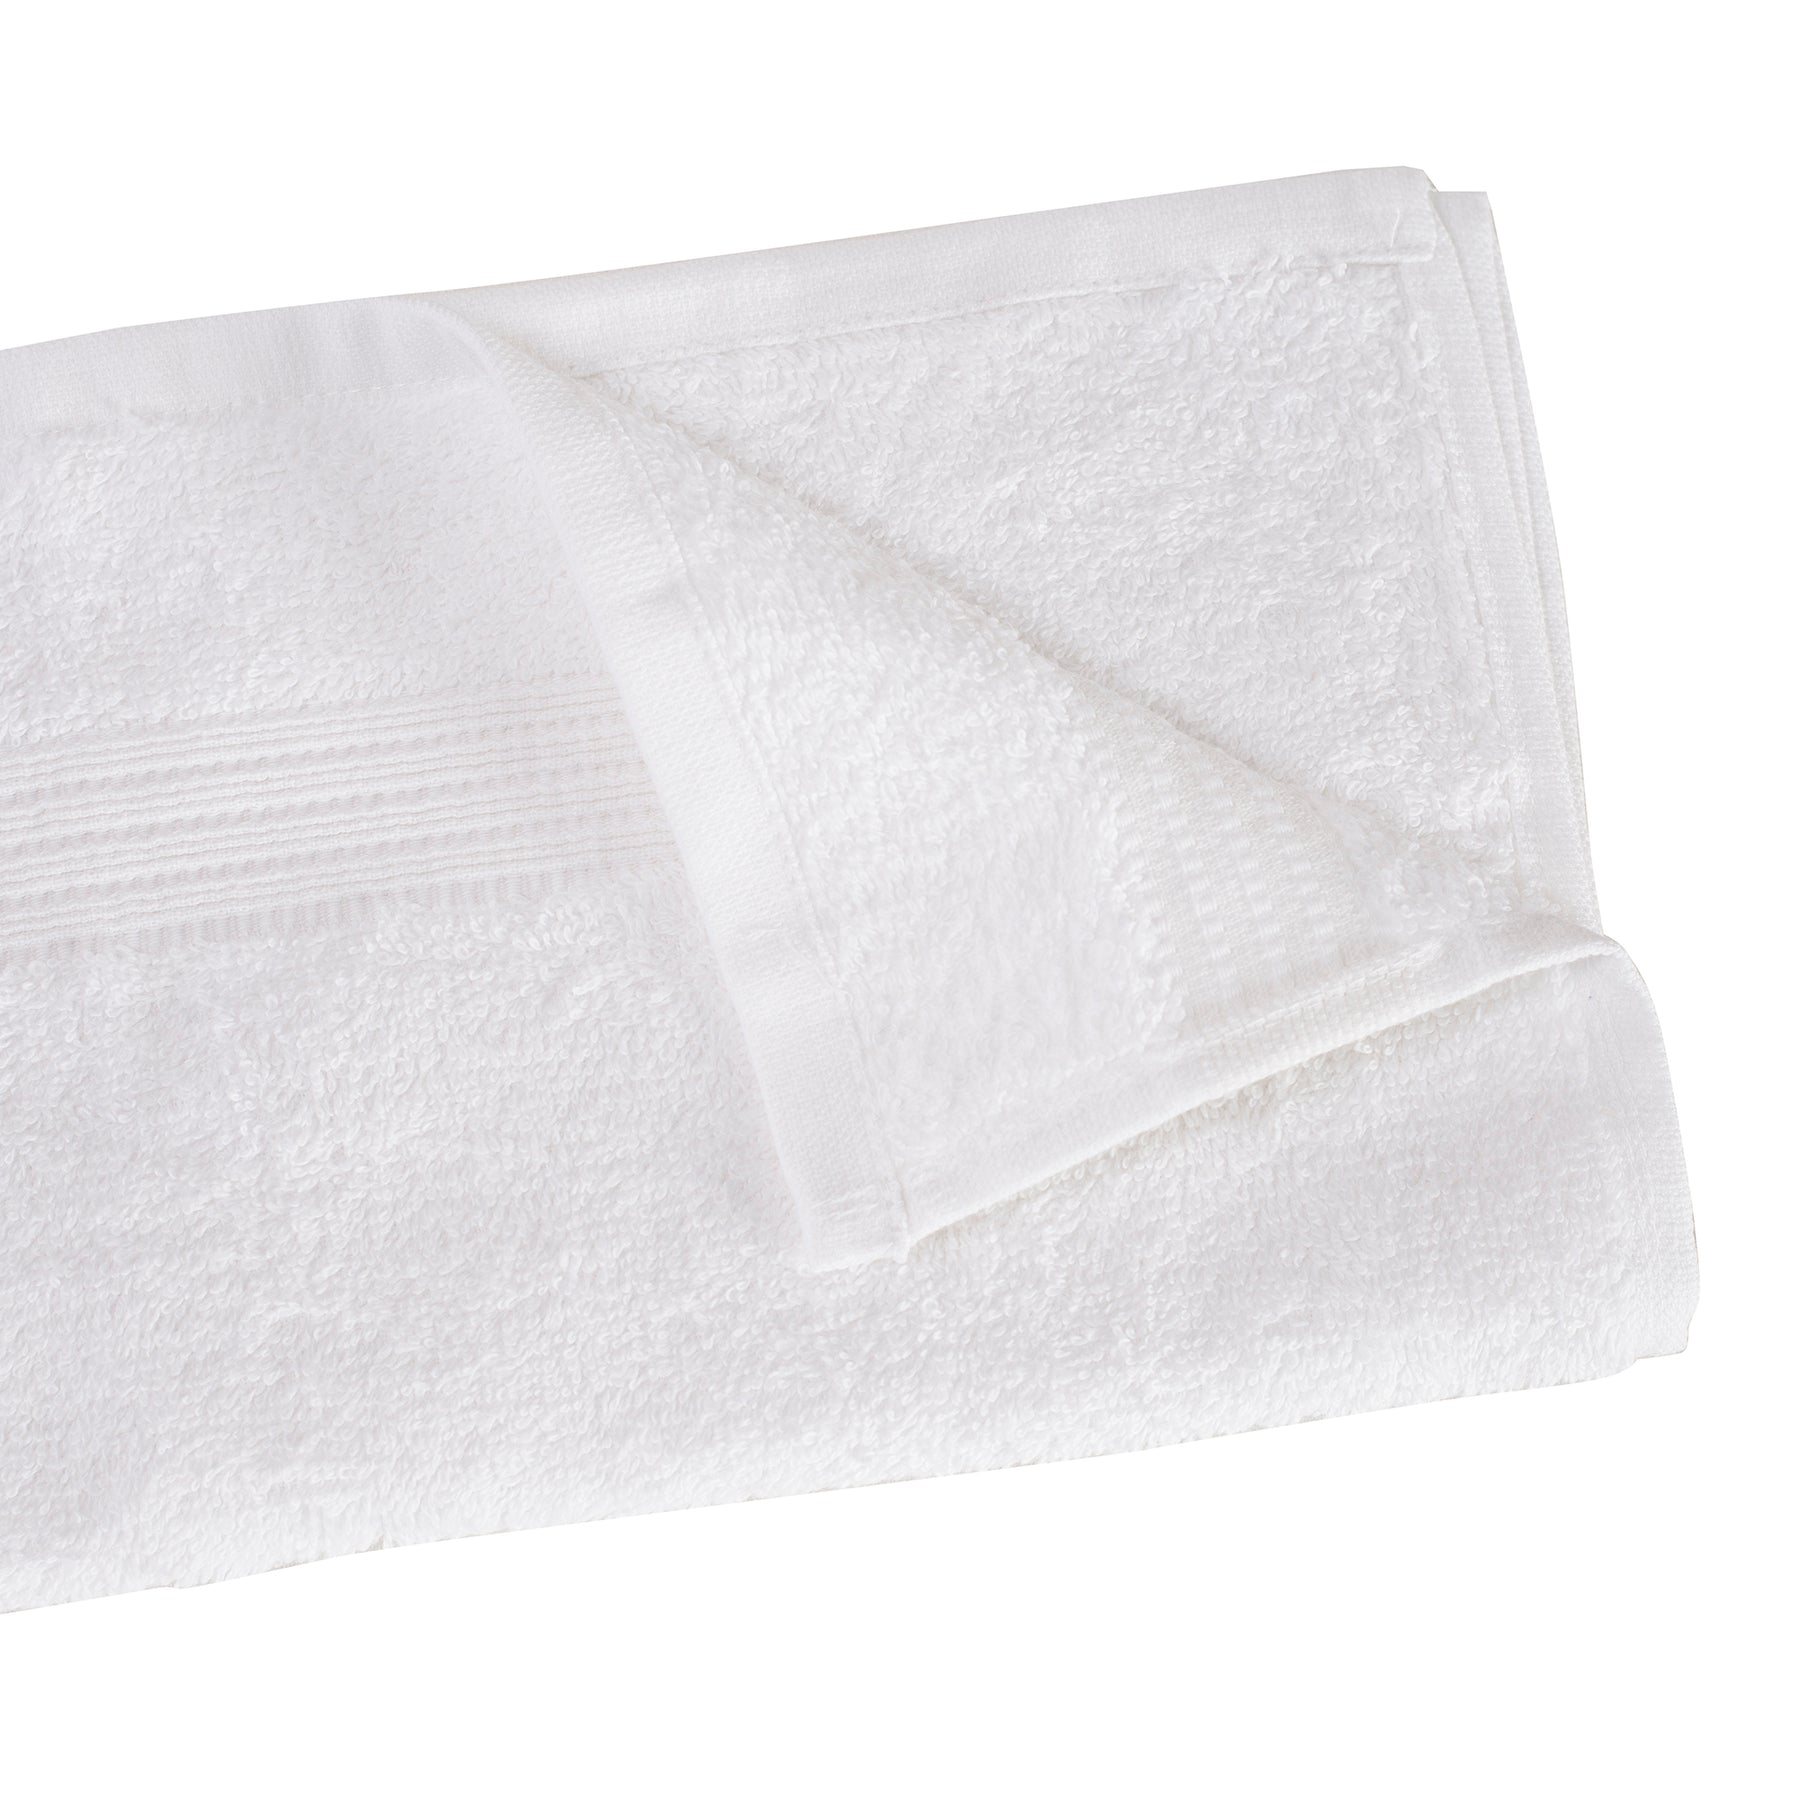 Jeneth Ultra-soft and highly absorbant White Towel